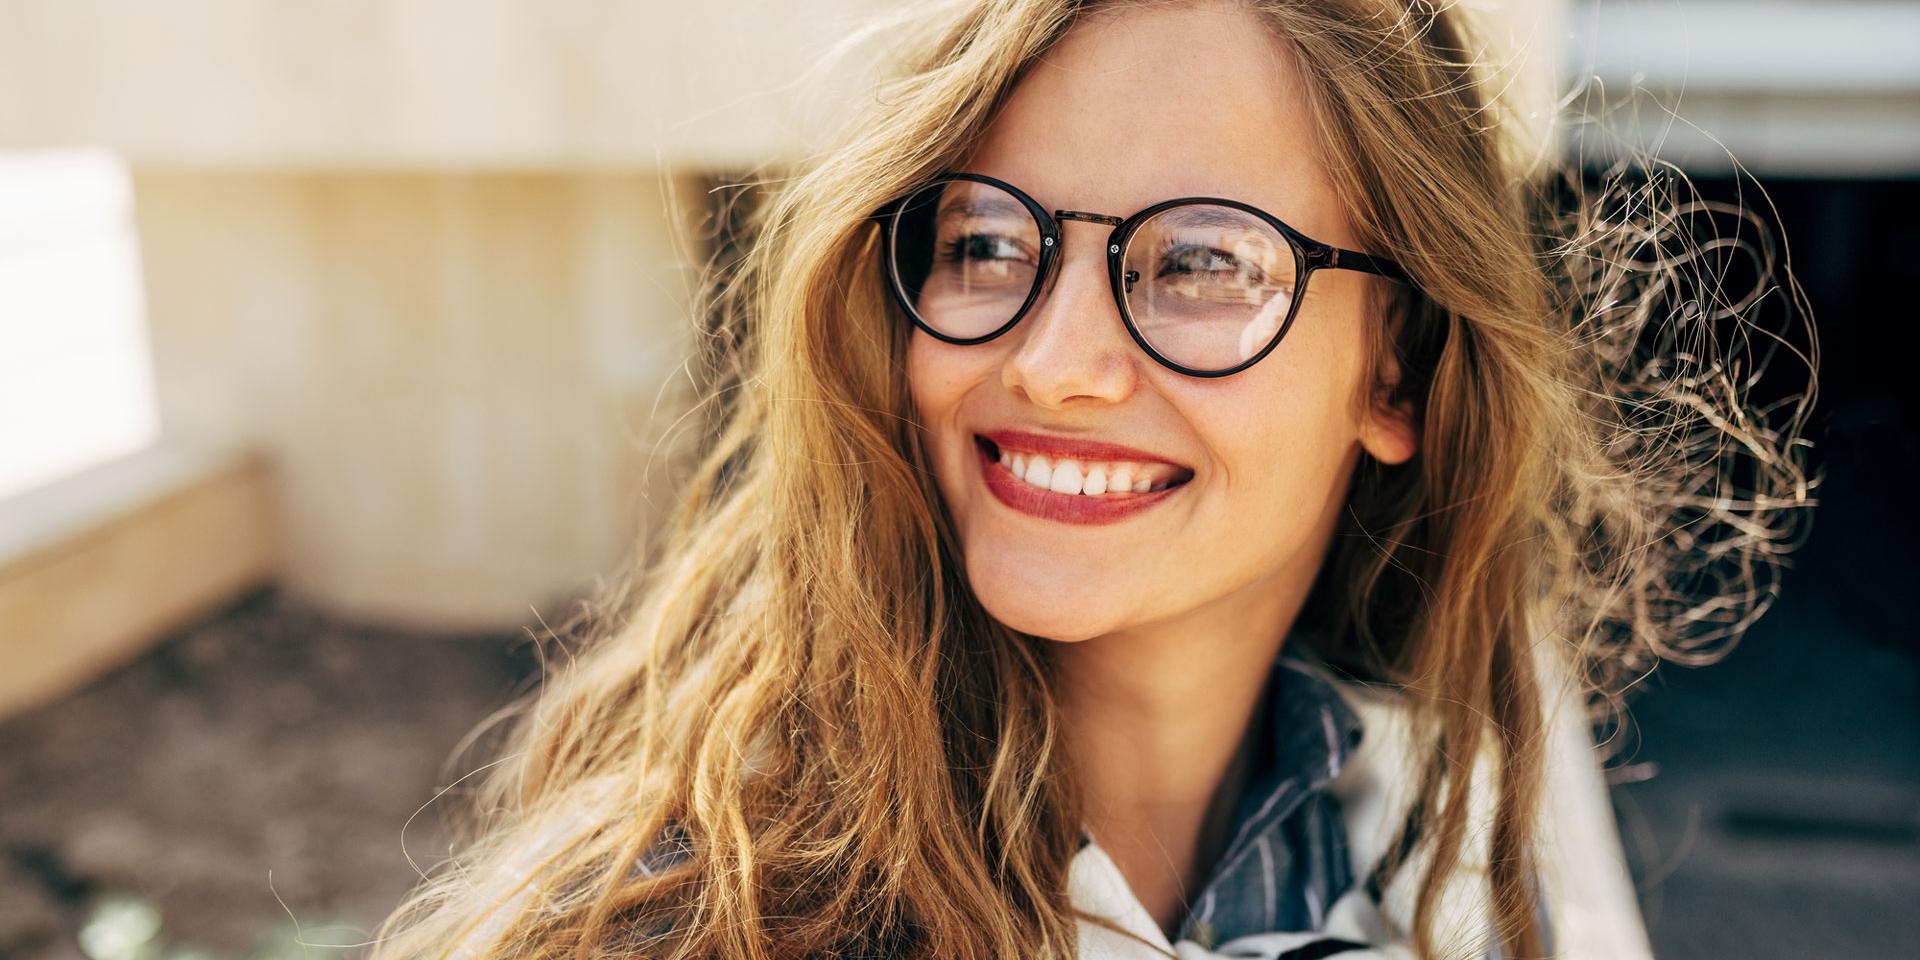 How Your Eyeglasses Reflect Your Personality